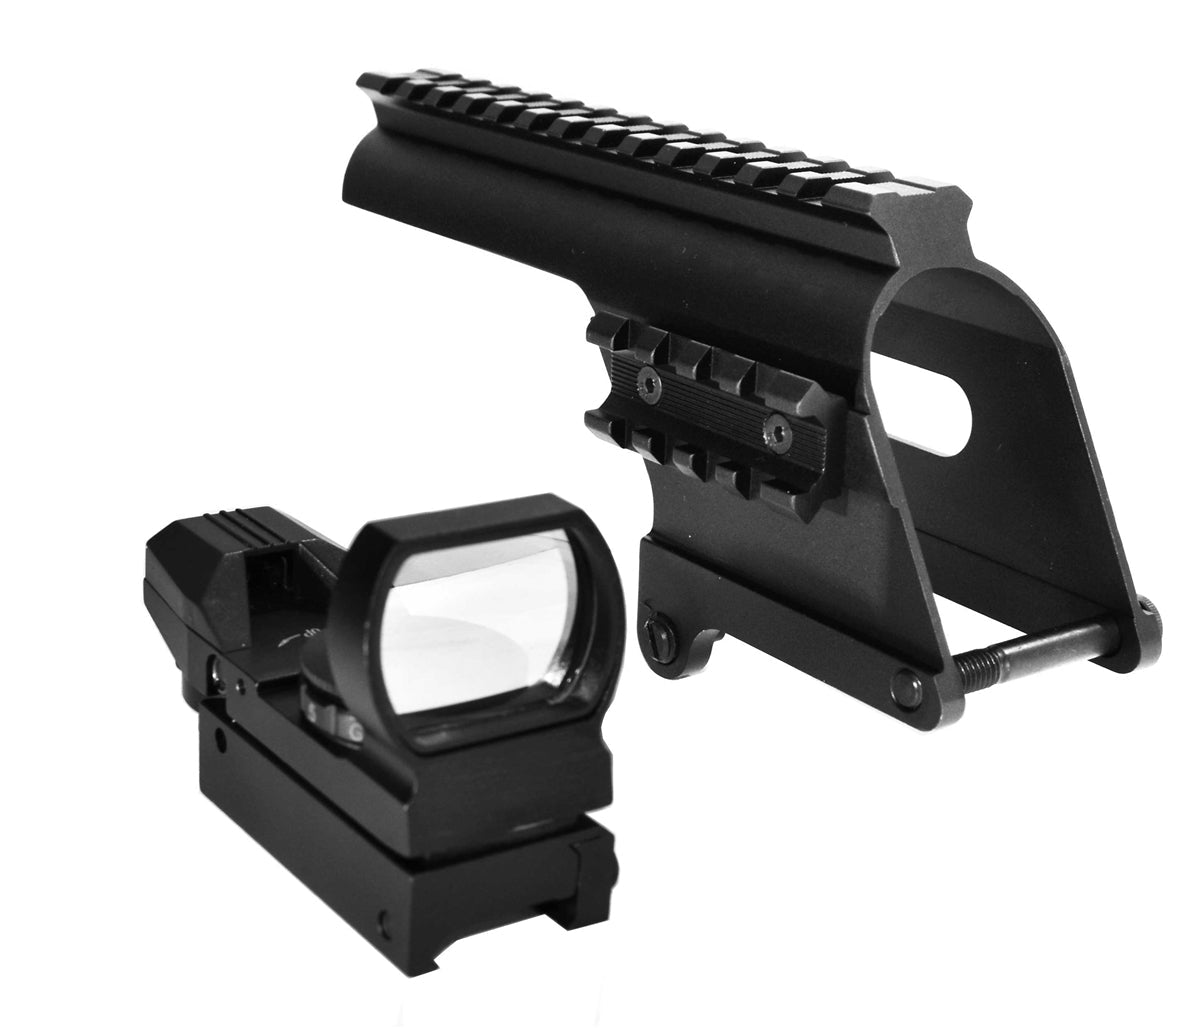 Trinity Saddle Mount With Side Rail And Reflex Sight For Winchester 1200-1500 12 Gauge Models. - TRINITY SUPPLY INC